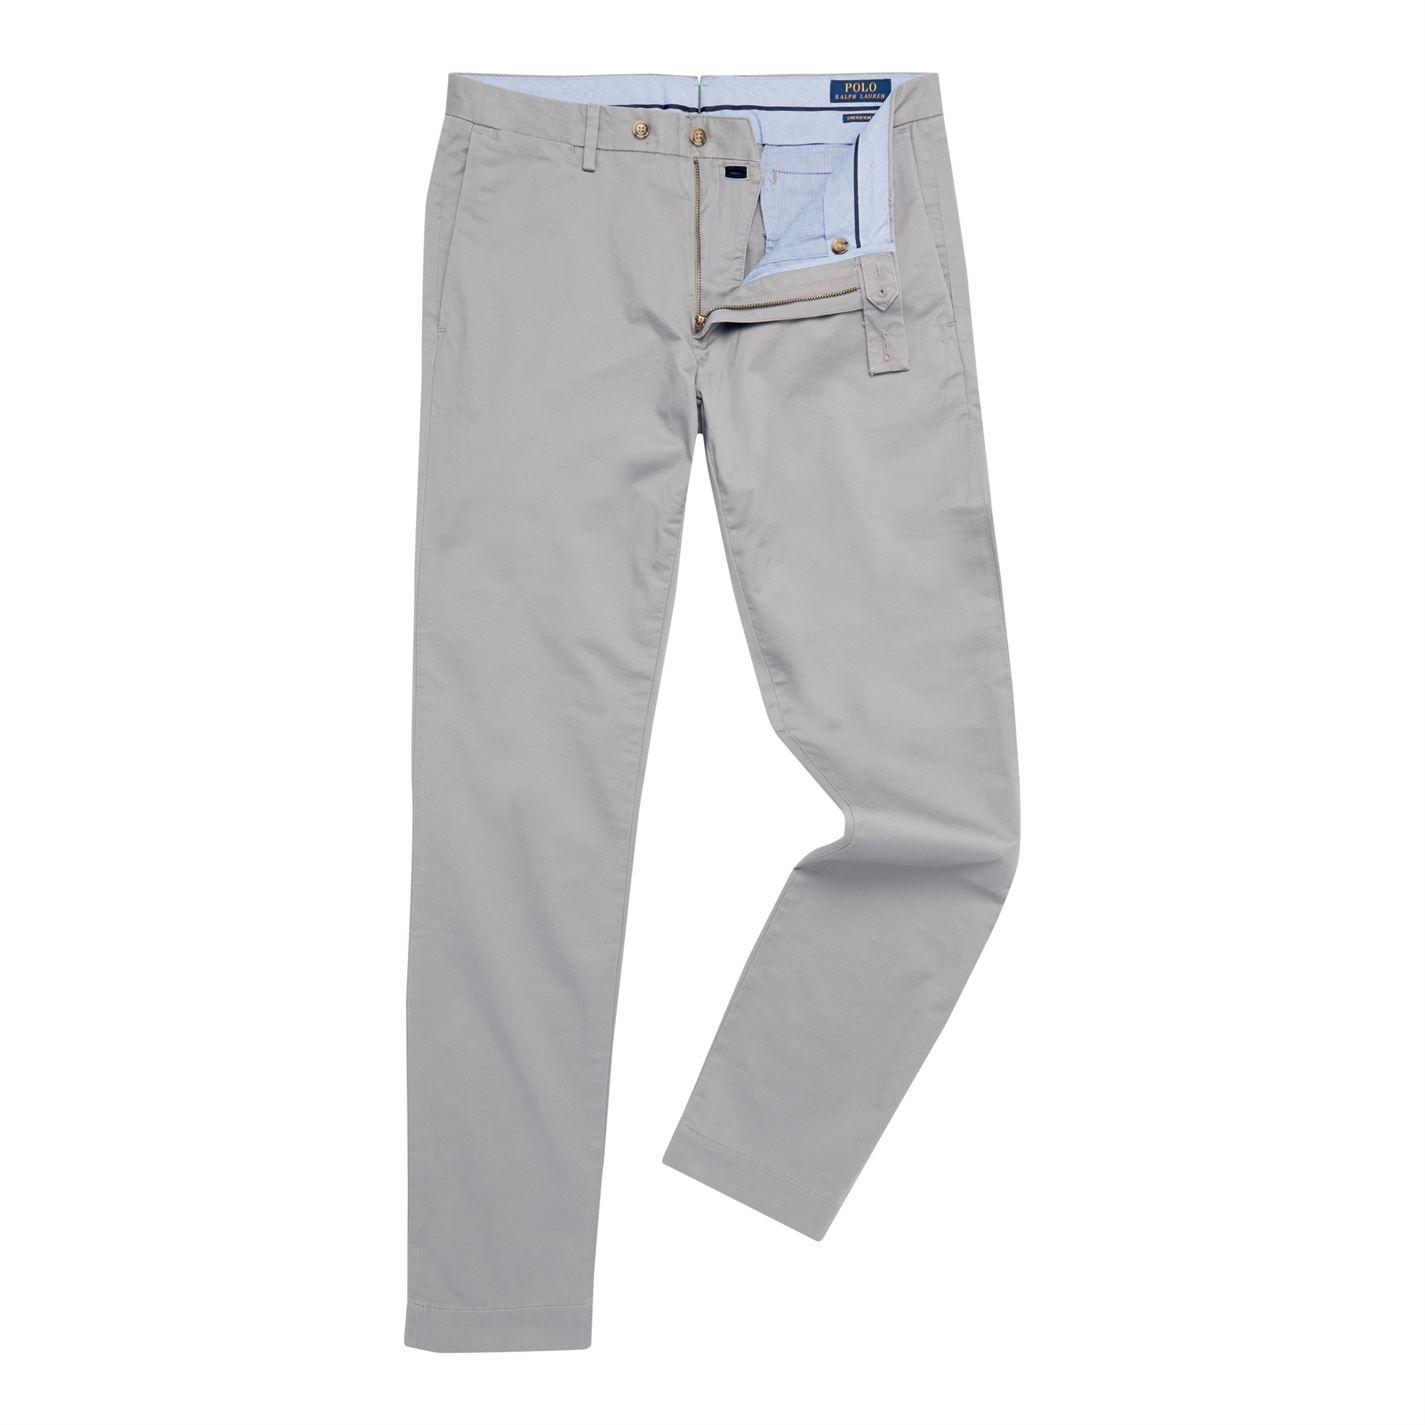 Polo Ralph Lauren Clean Wash Chinos in Gray for Men - Lyst